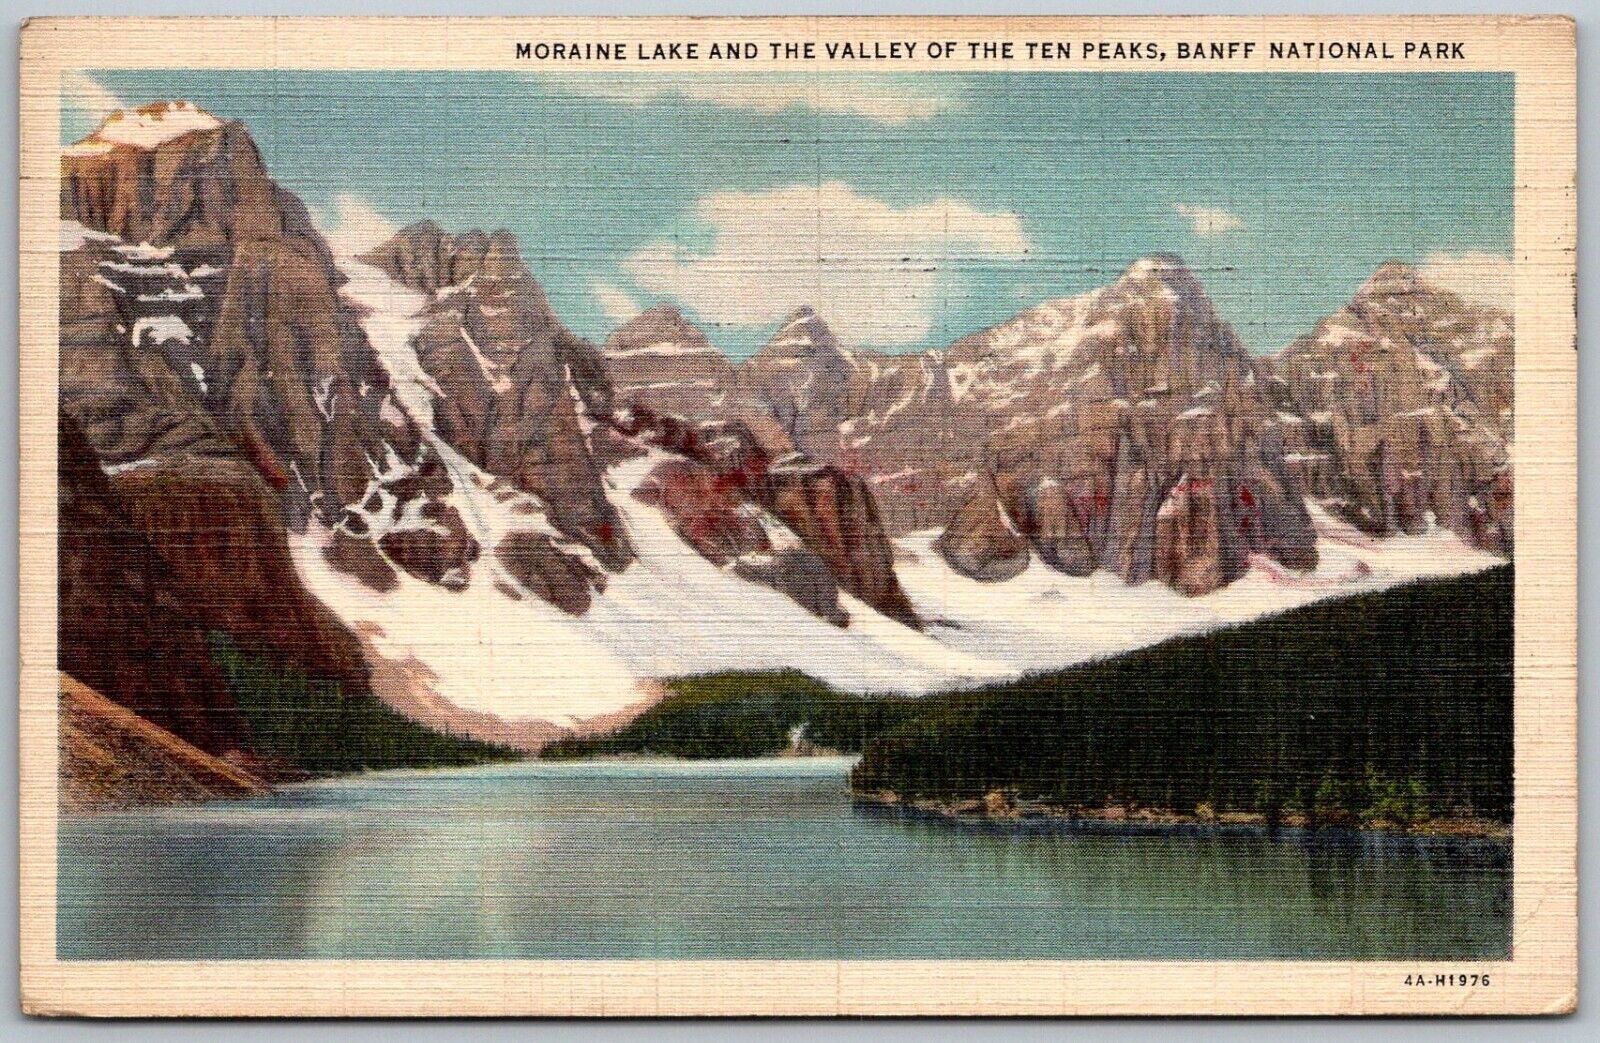 Banff National Park Canada 1939 Postcard Moraine Lake & Valley of The Ten Peaks